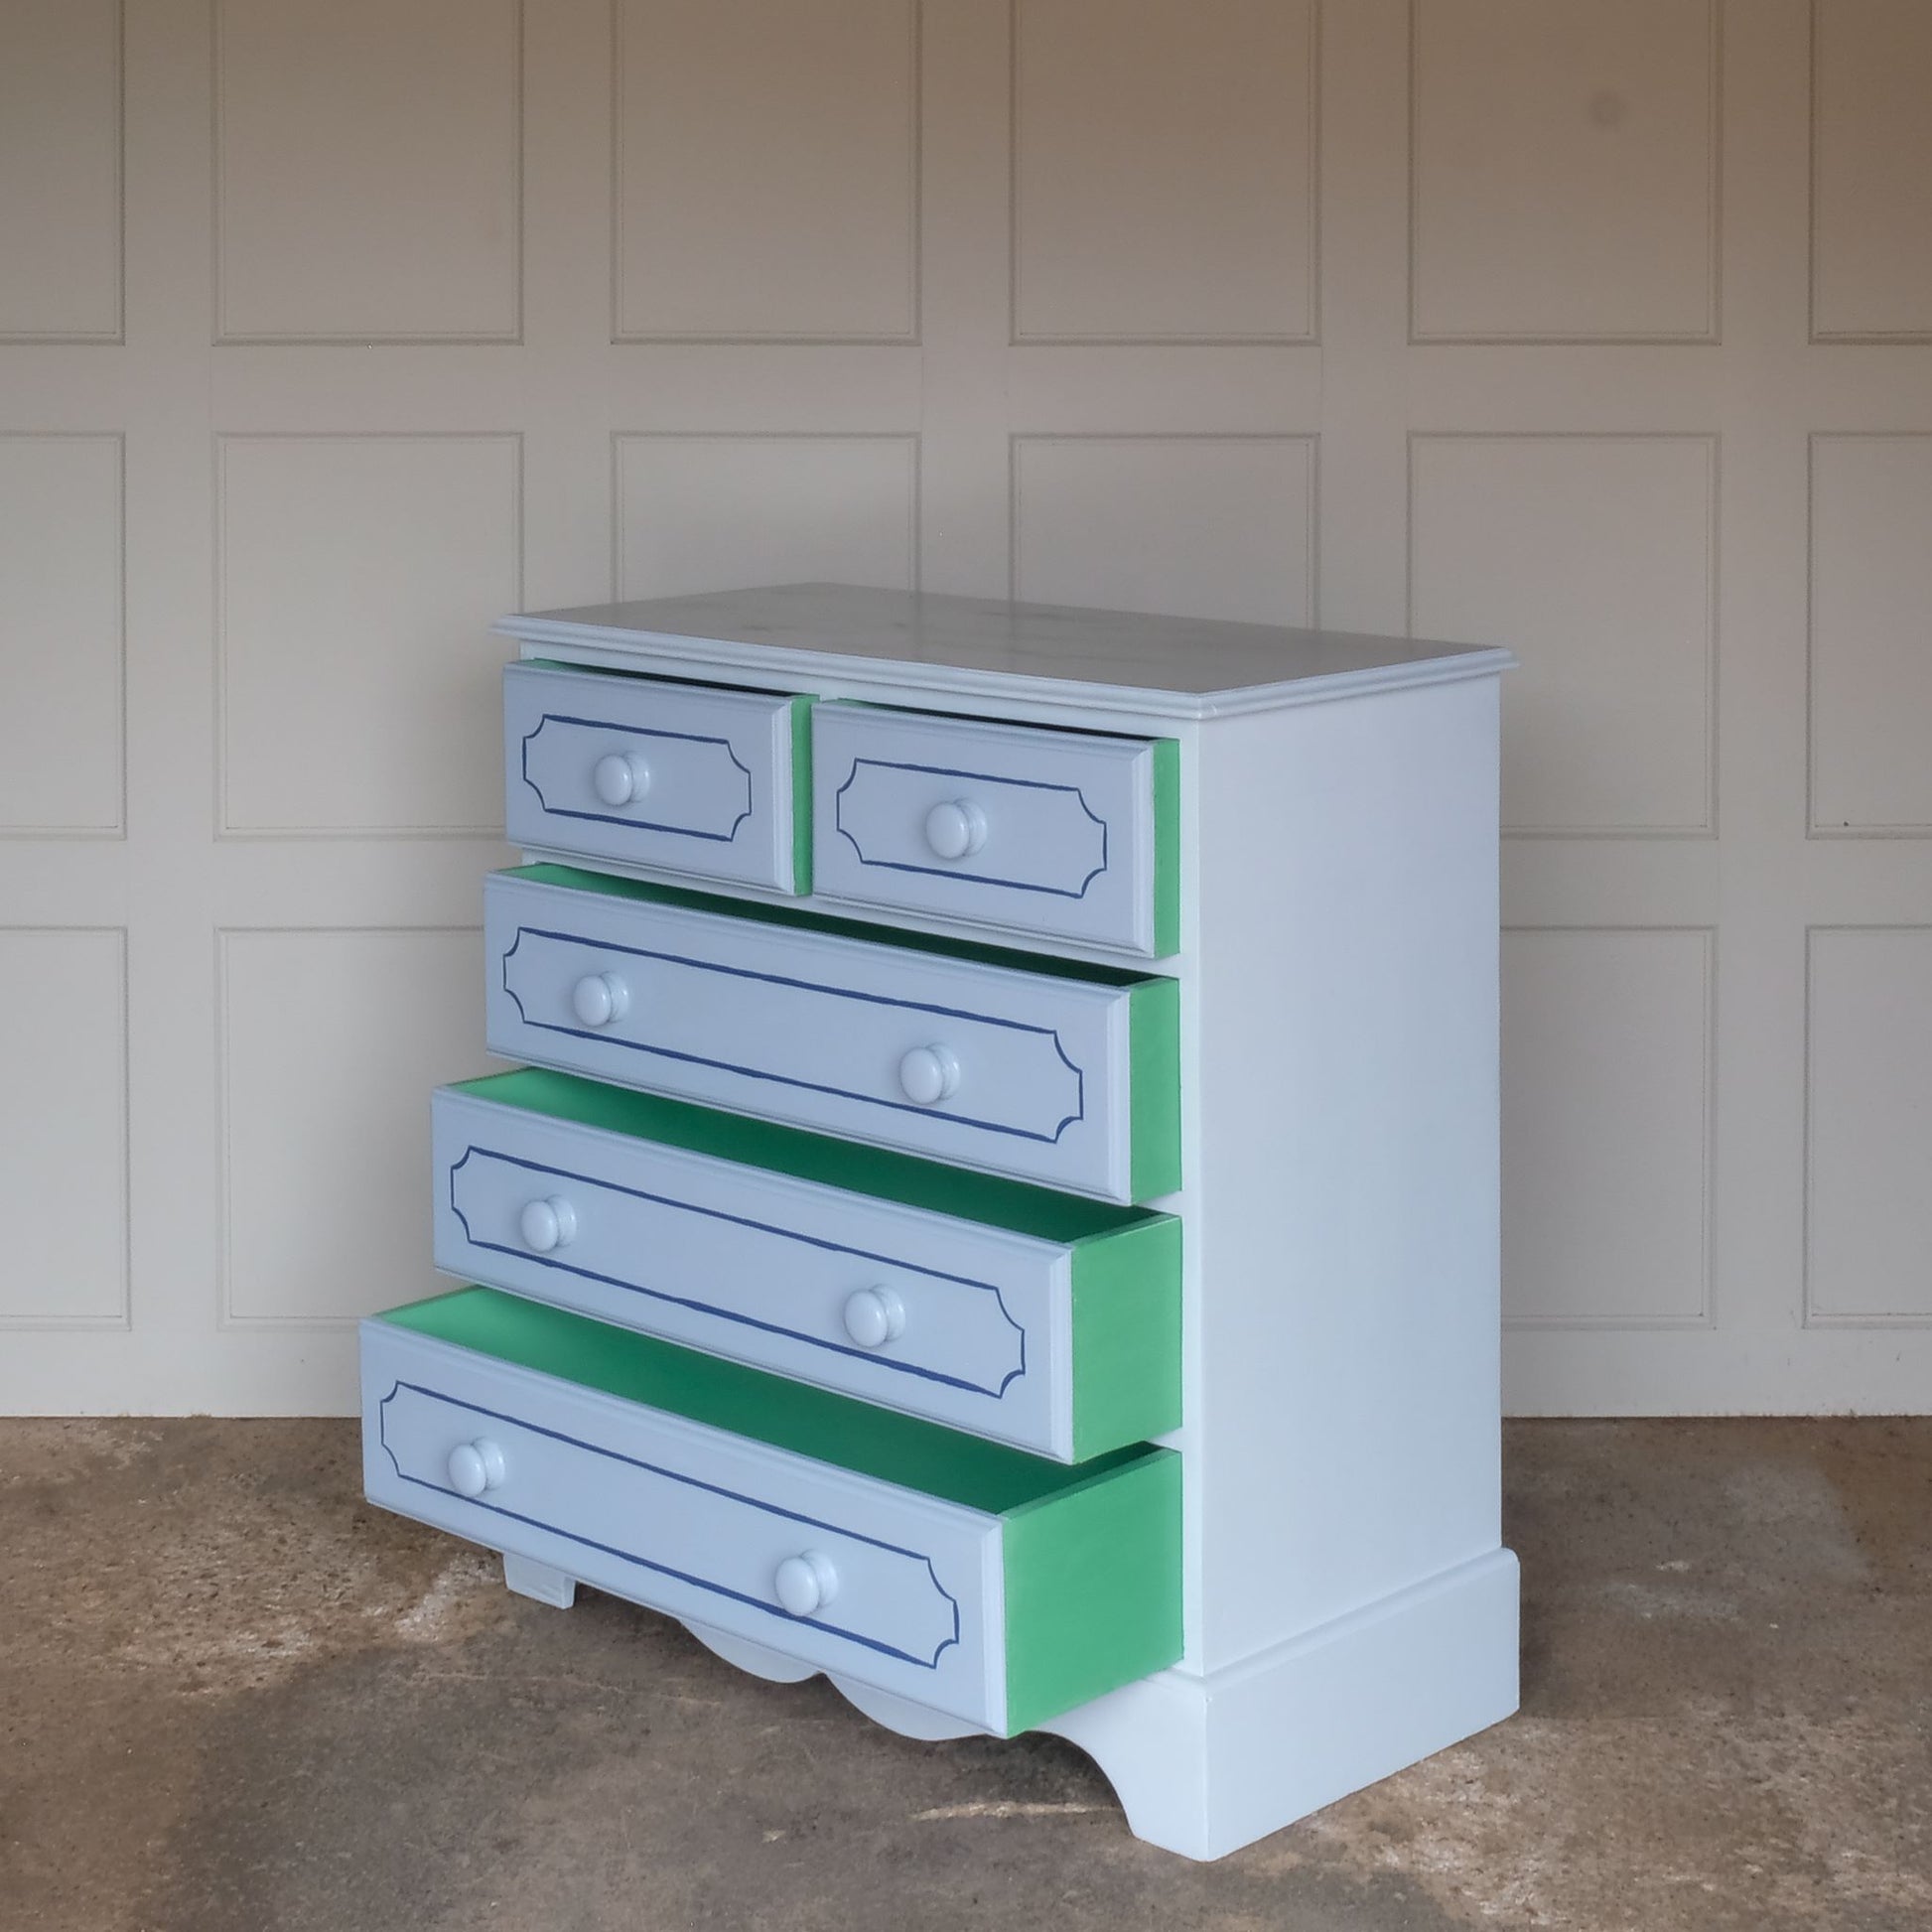 A hand painted blue pine chest of drawers, consisting of two short and three long drawers. The drawers have been painted with an elegant line detail on the front and a vibrant green to the inside and sides. The drawers are painted in a blue a shade deeper than the main body of the chest. In good sturdy condition, with all drawers running smoothly.